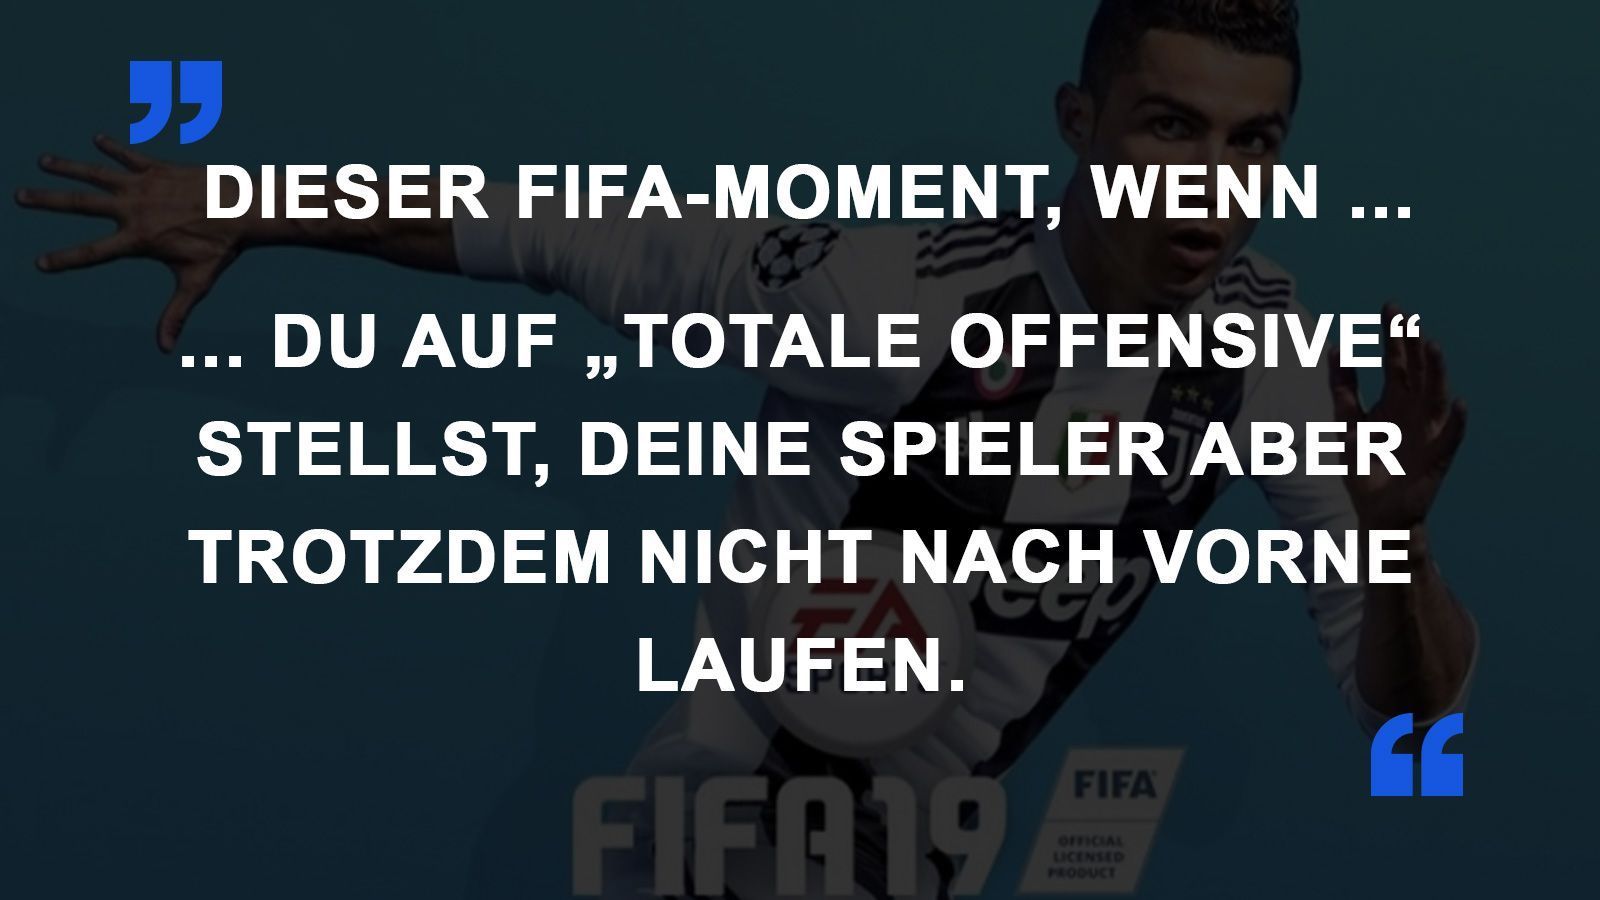 
                <strong>FIFA Momente totale Offensive</strong><br>
                
              